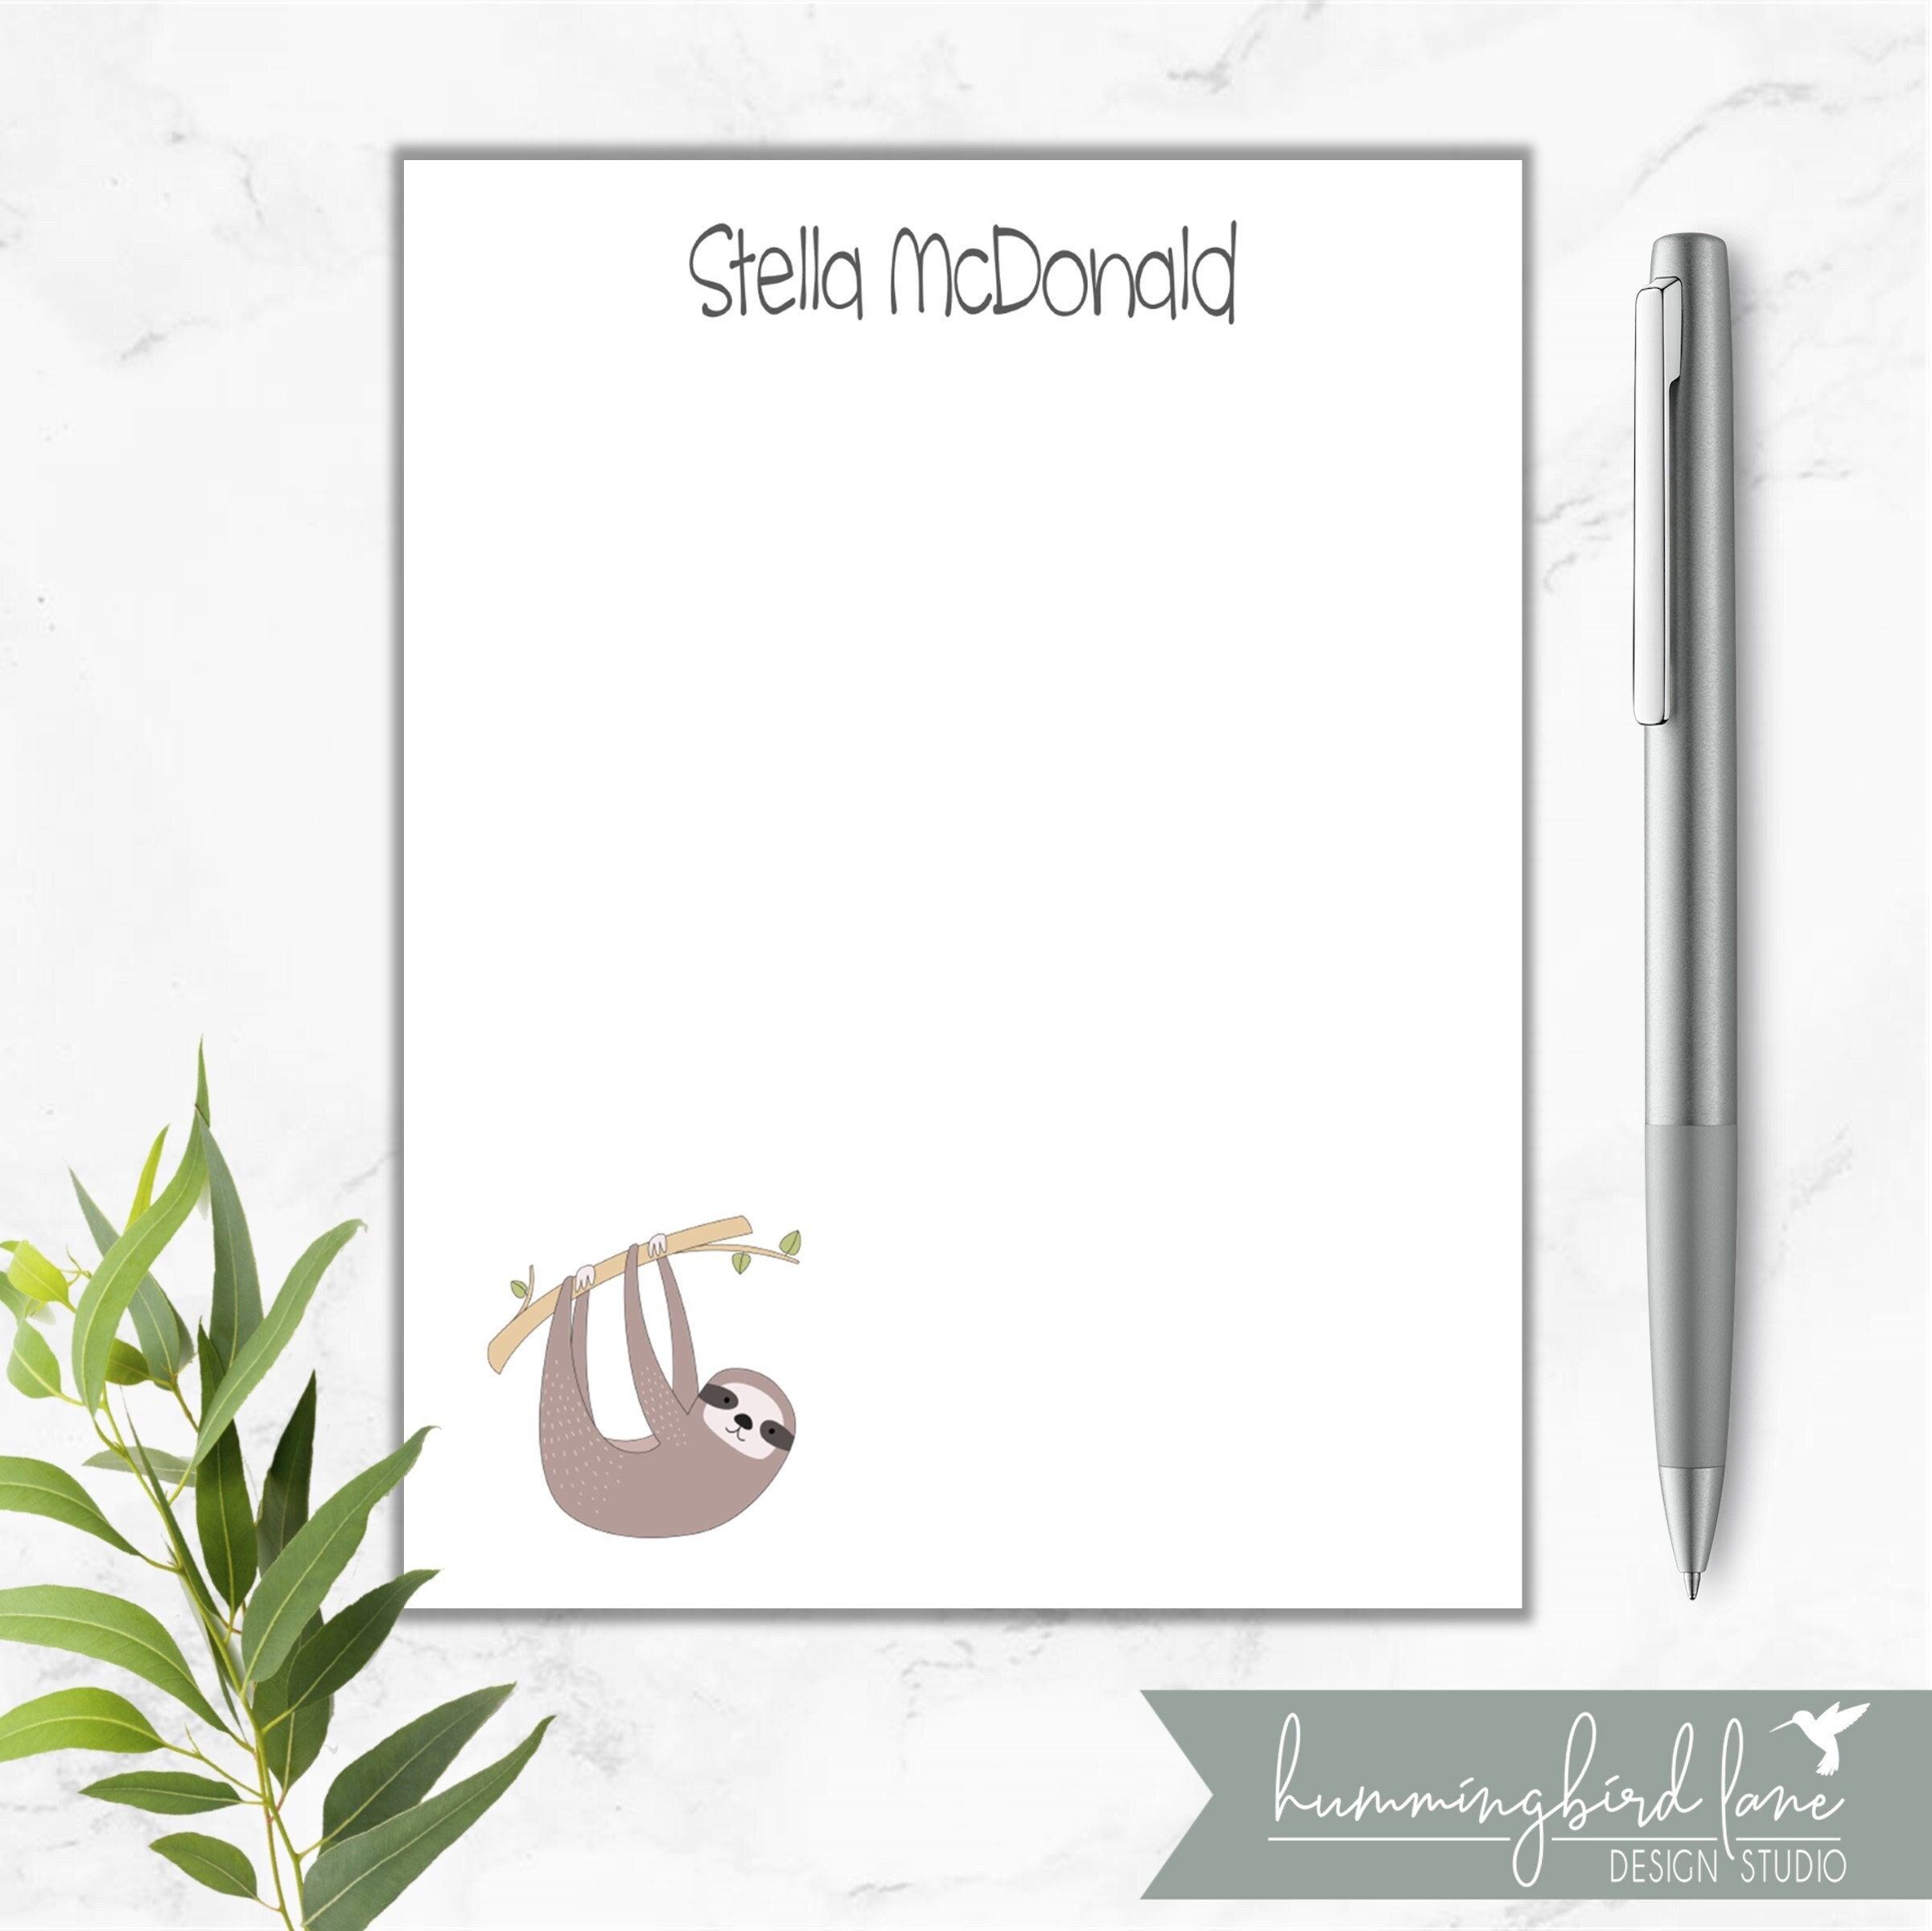 Custom Made With Name Initials And Sloth Illustration Personalised Sloth Memo Pad Teacher Or CoWorker Gift Cute Stationery For The Office